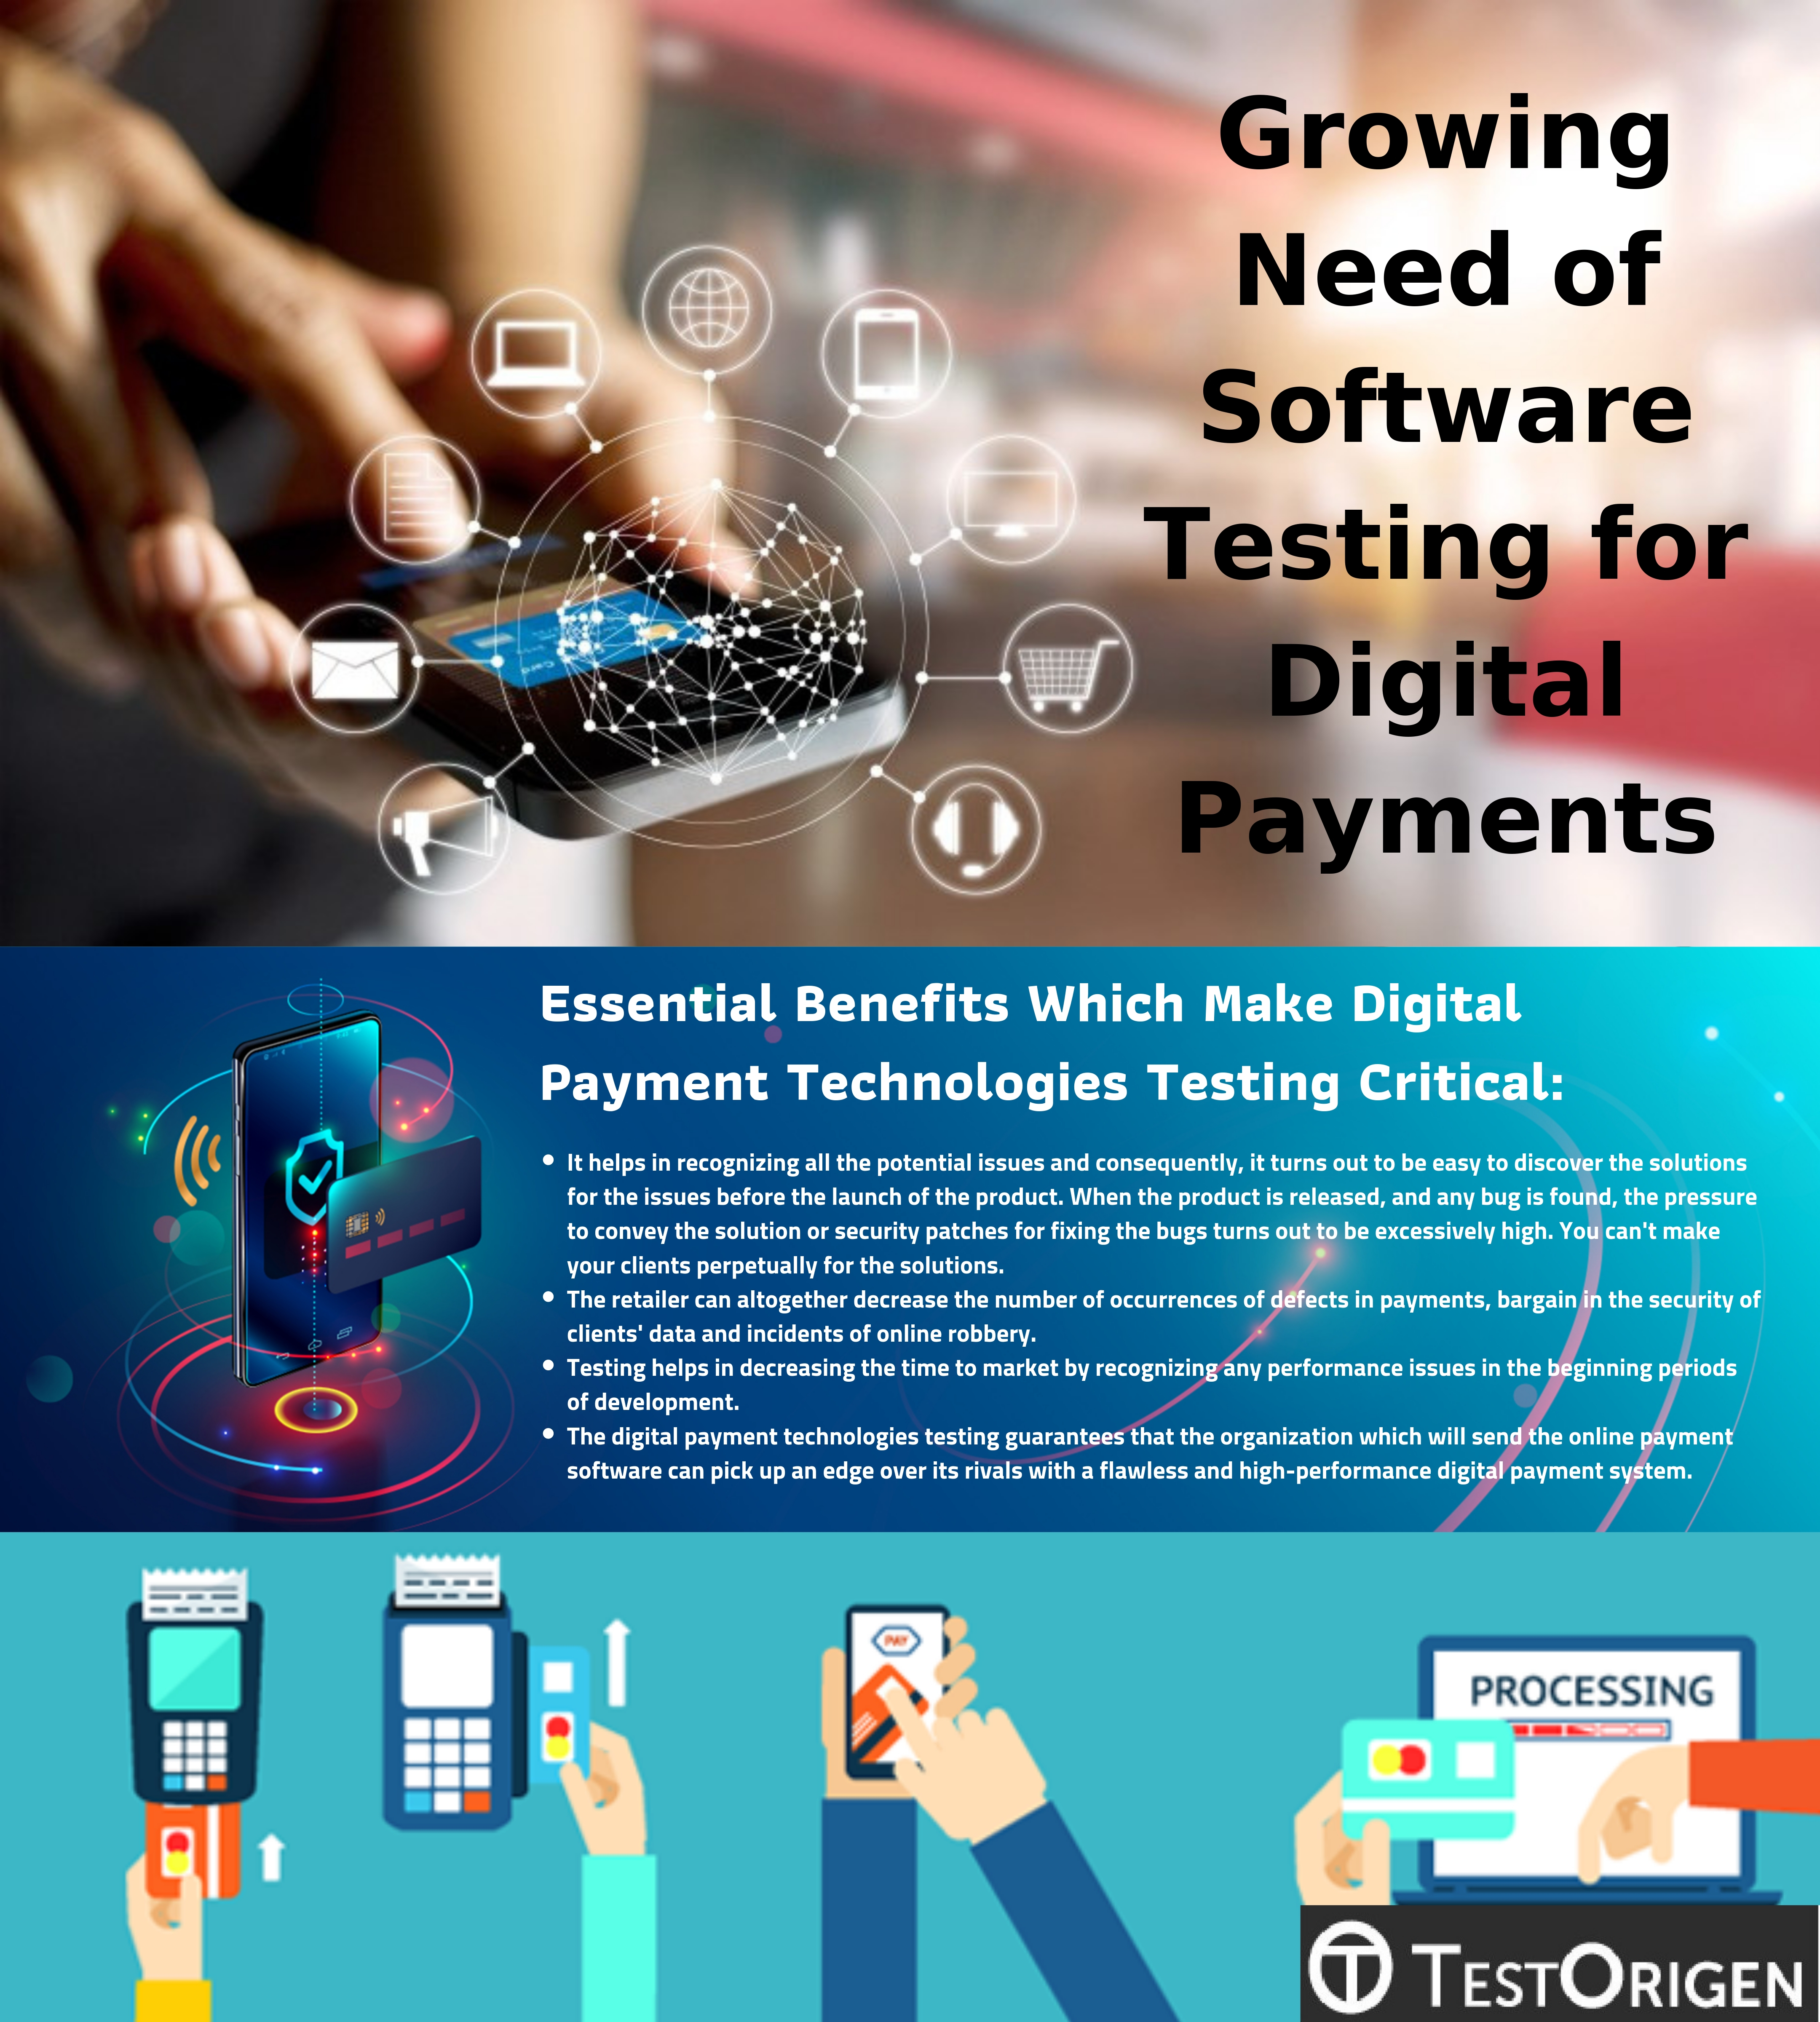 Growing Need of Software Testing for Digital Payments